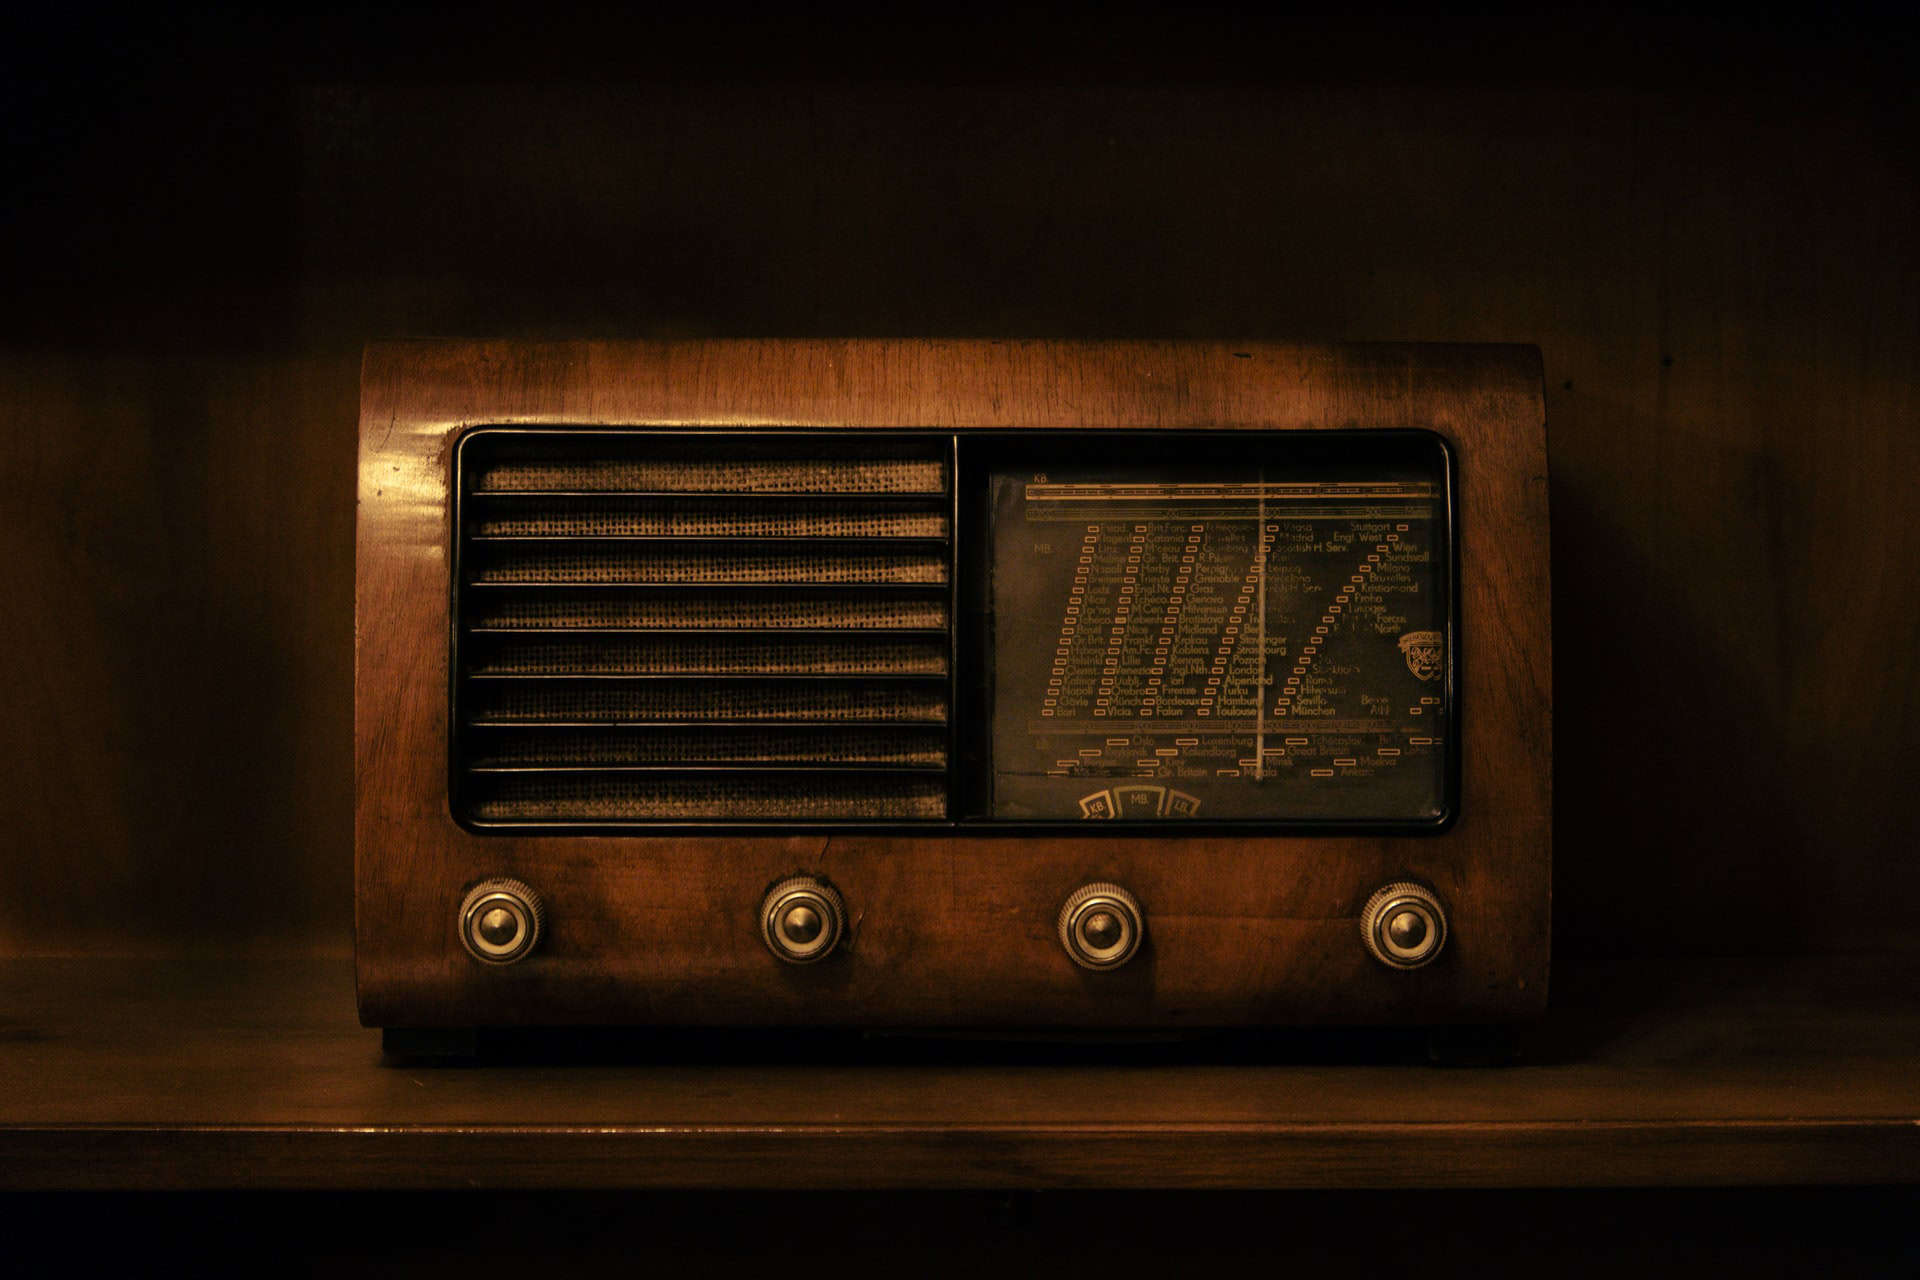 Vintage radio - All the Light We Cannot See Quotes Featured Image